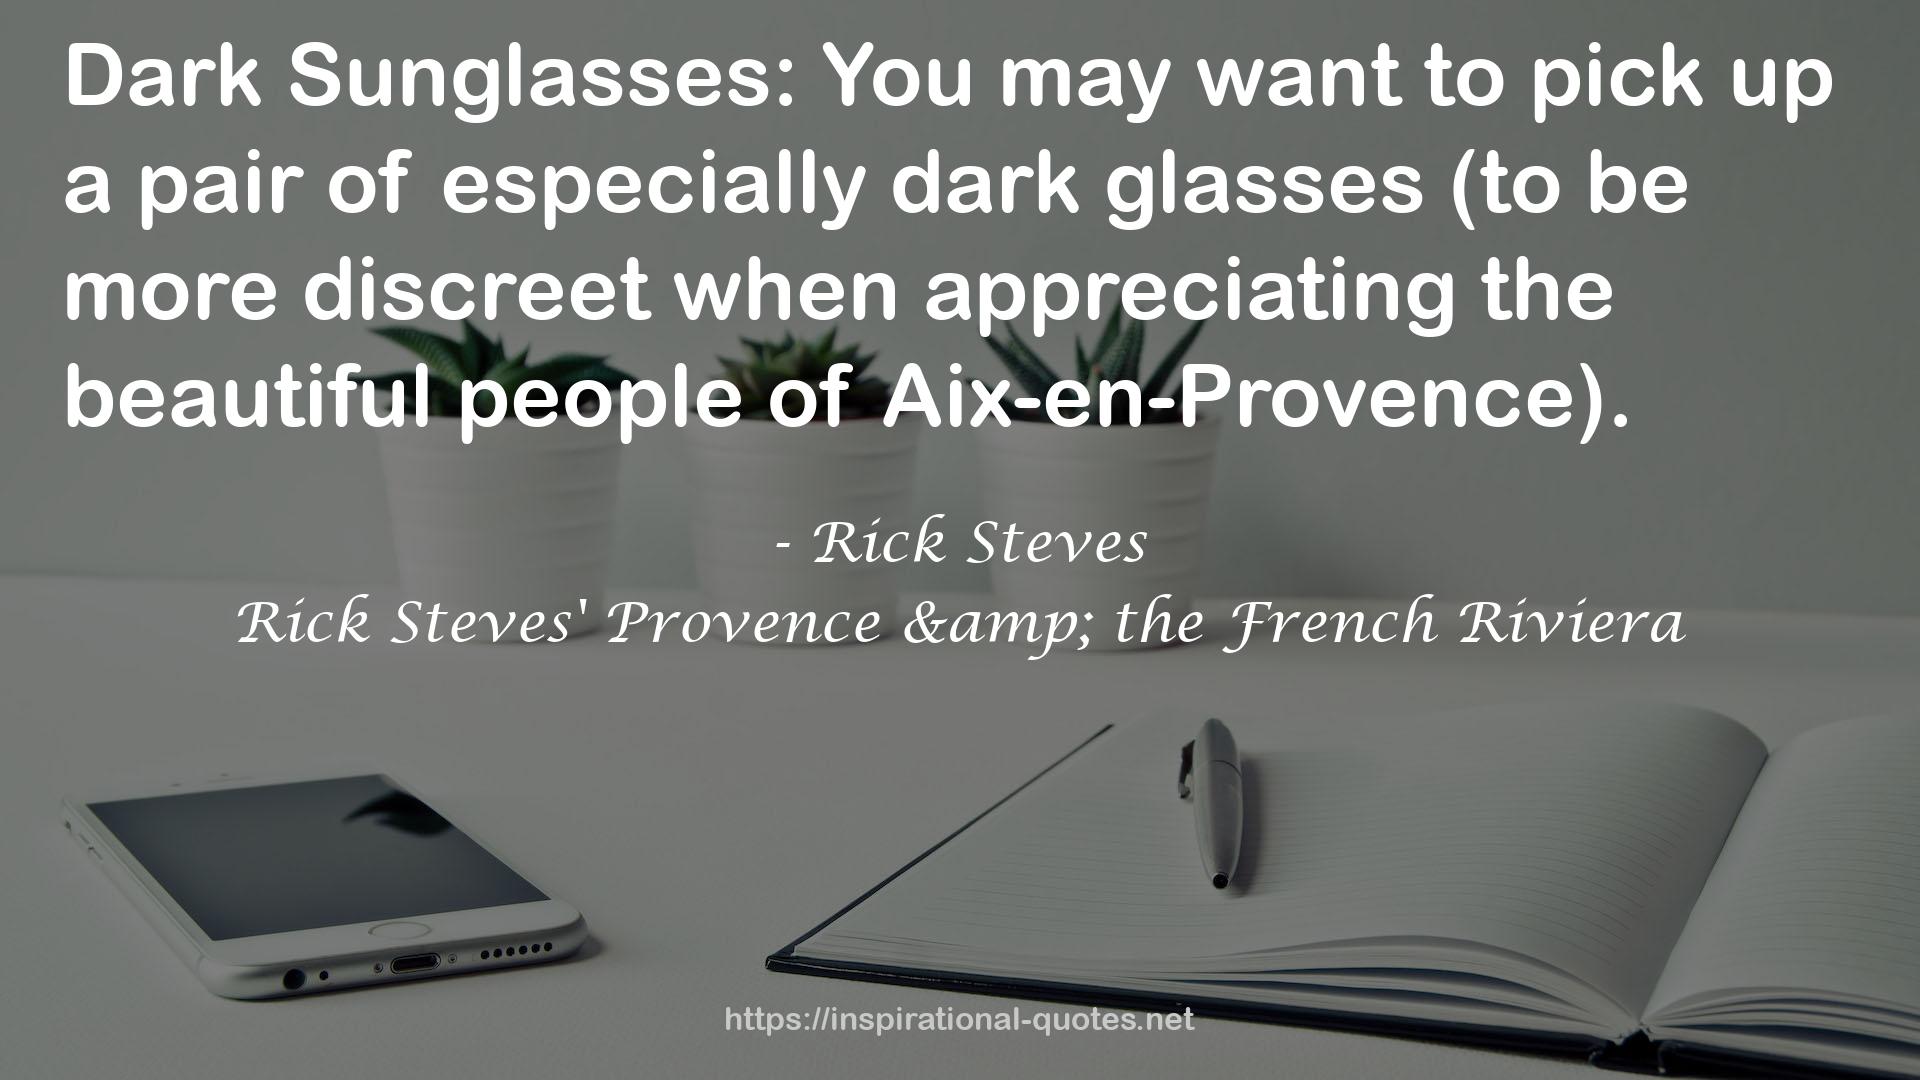 Rick Steves' Provence & the French Riviera QUOTES